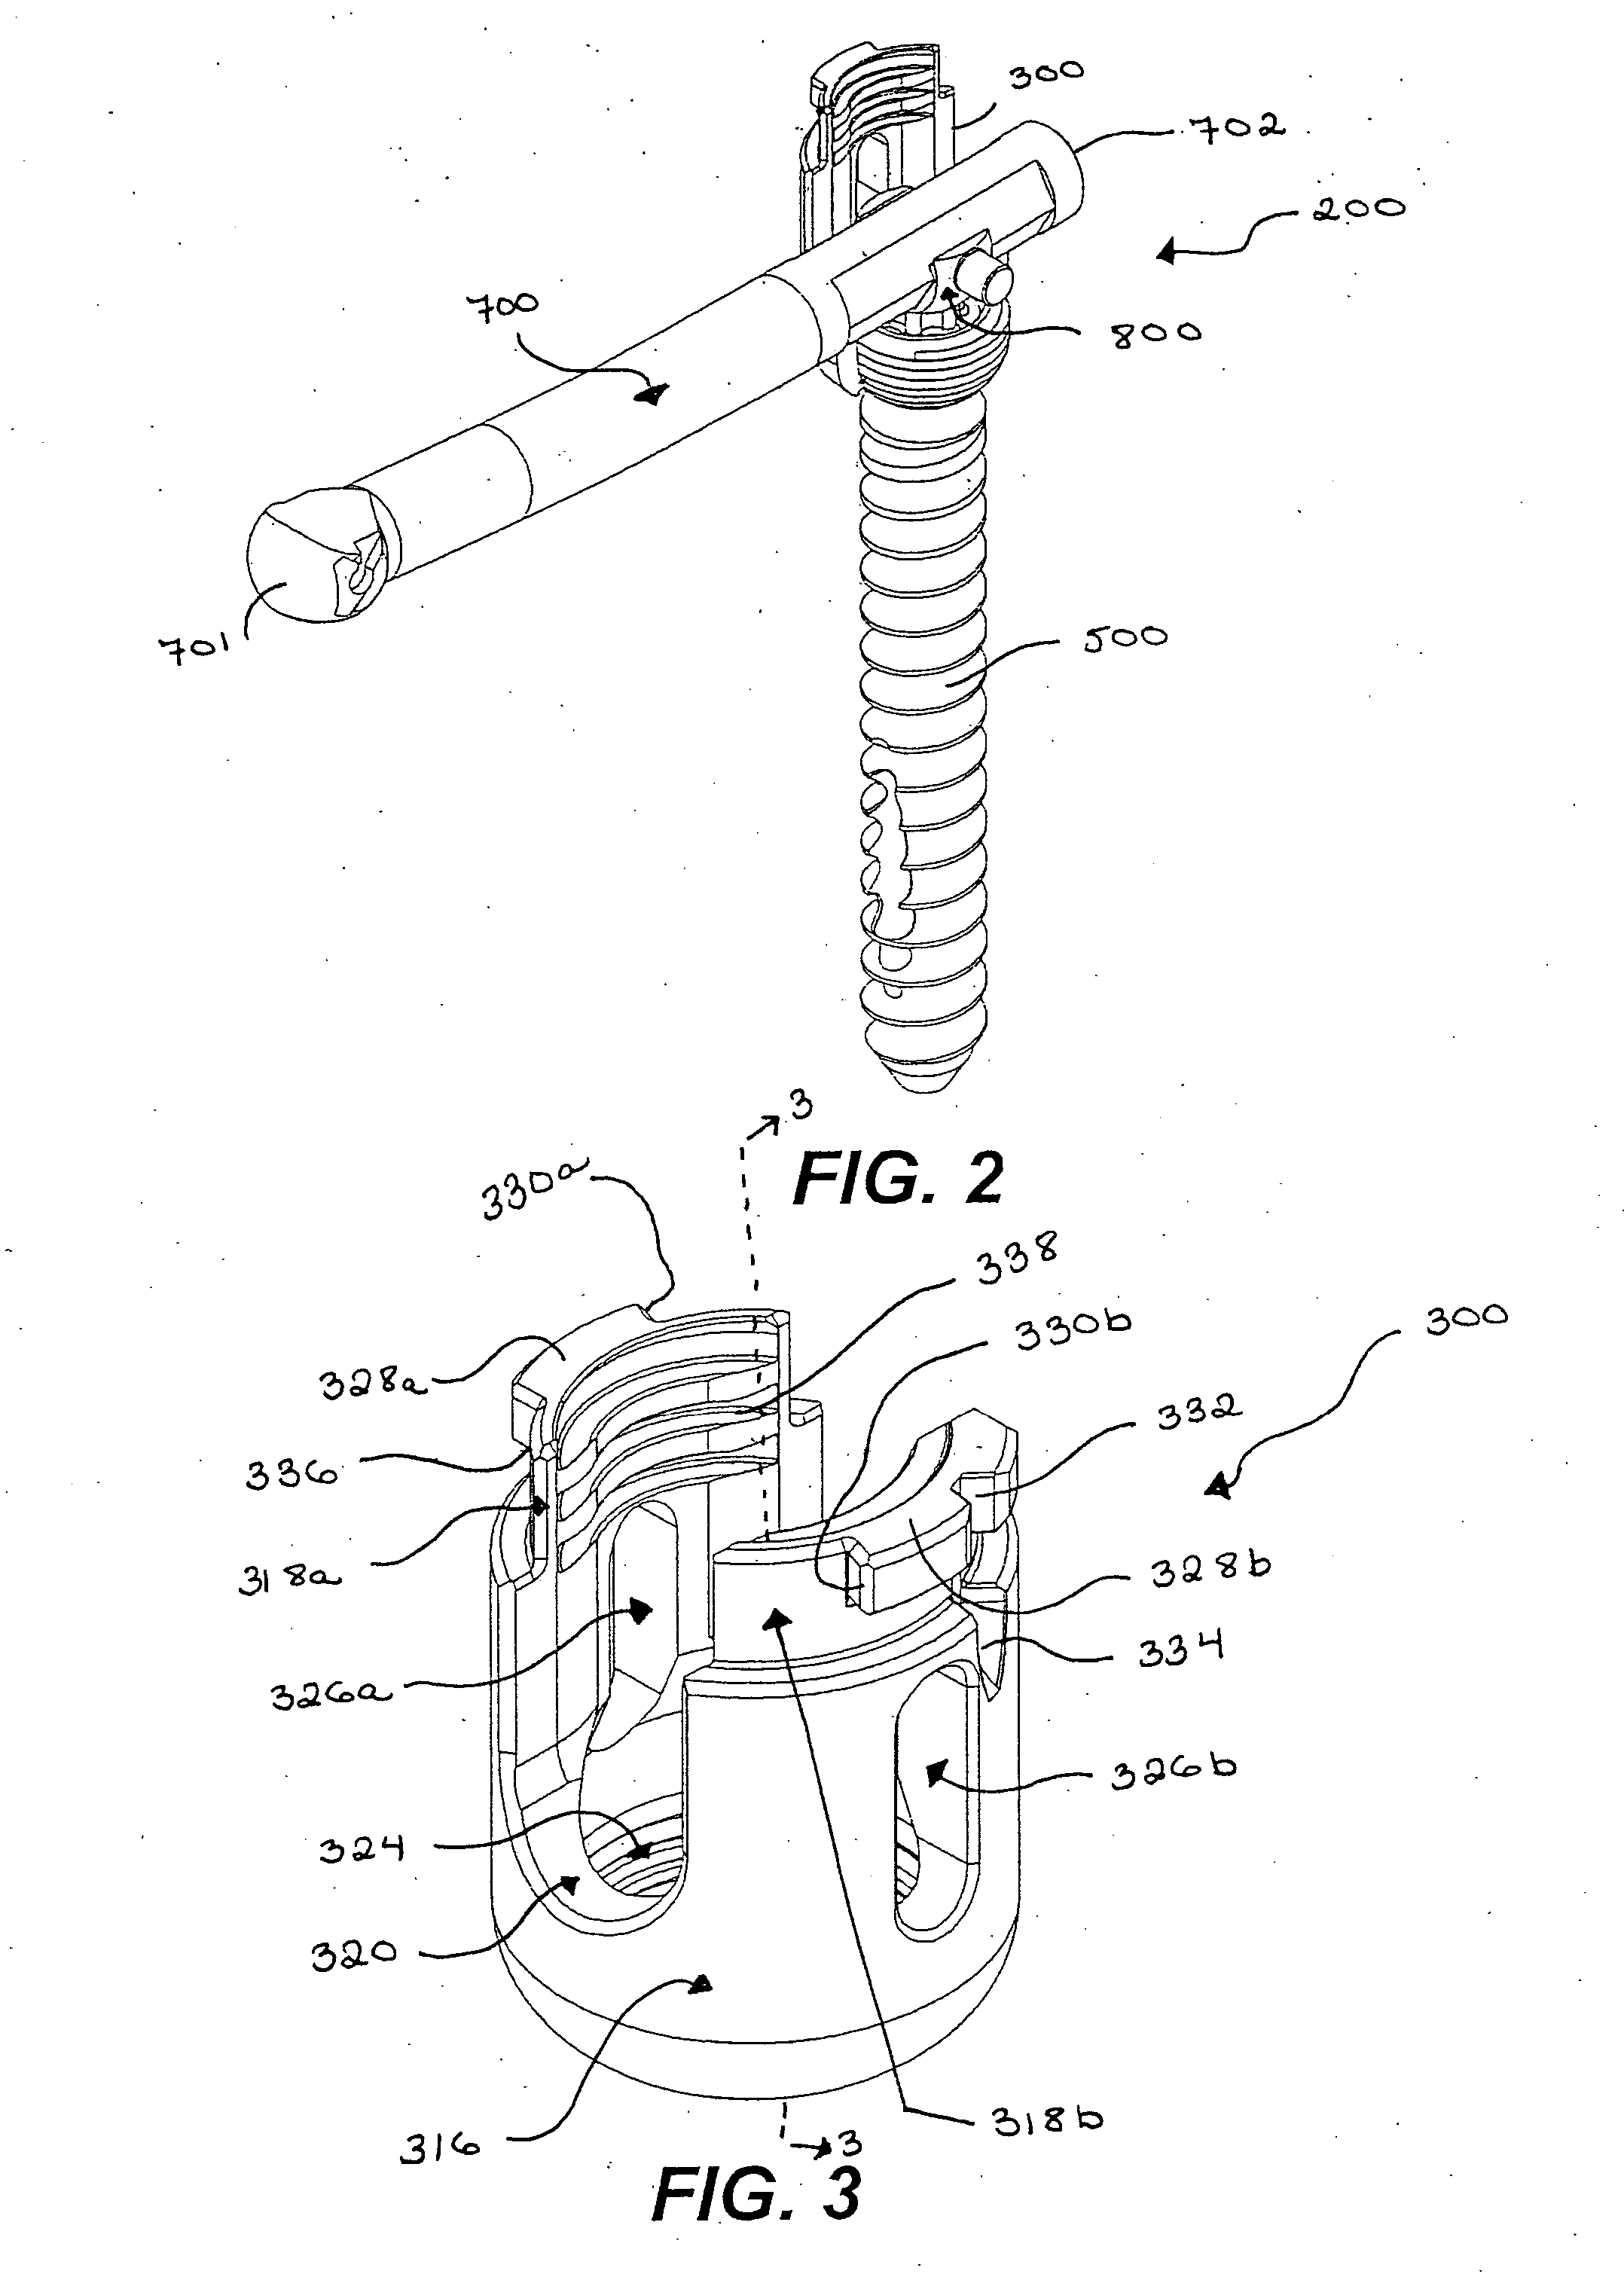 Connector transfer tool for internal structure stabilization systems